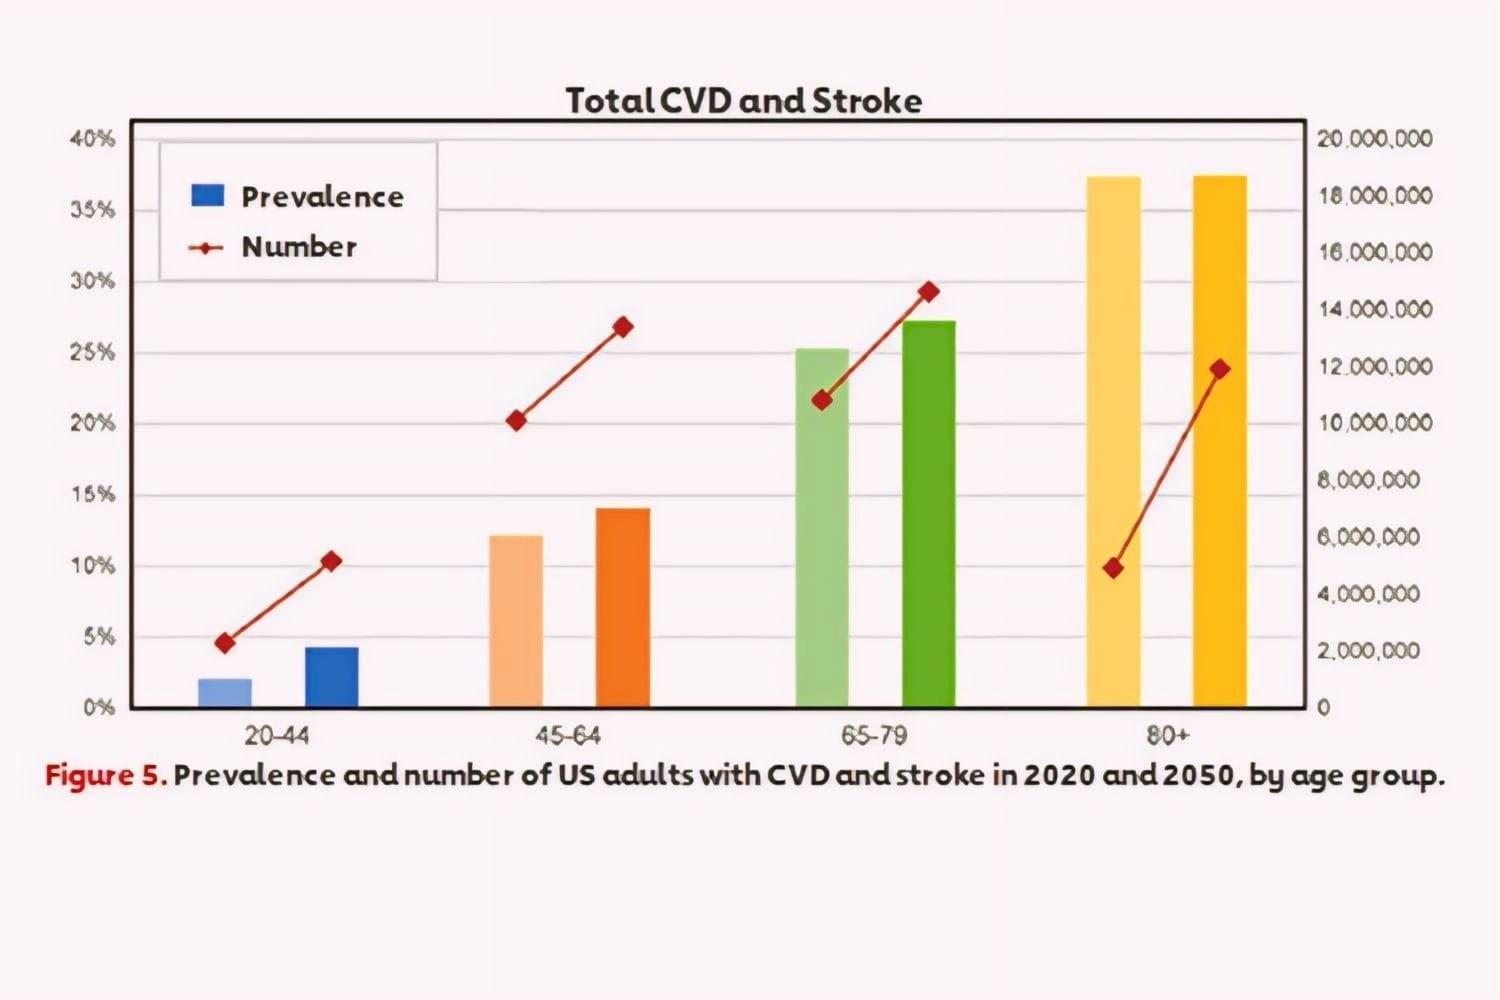 prevalence and number of US adults with CVD and stroke in 2020 and 2050 by age group